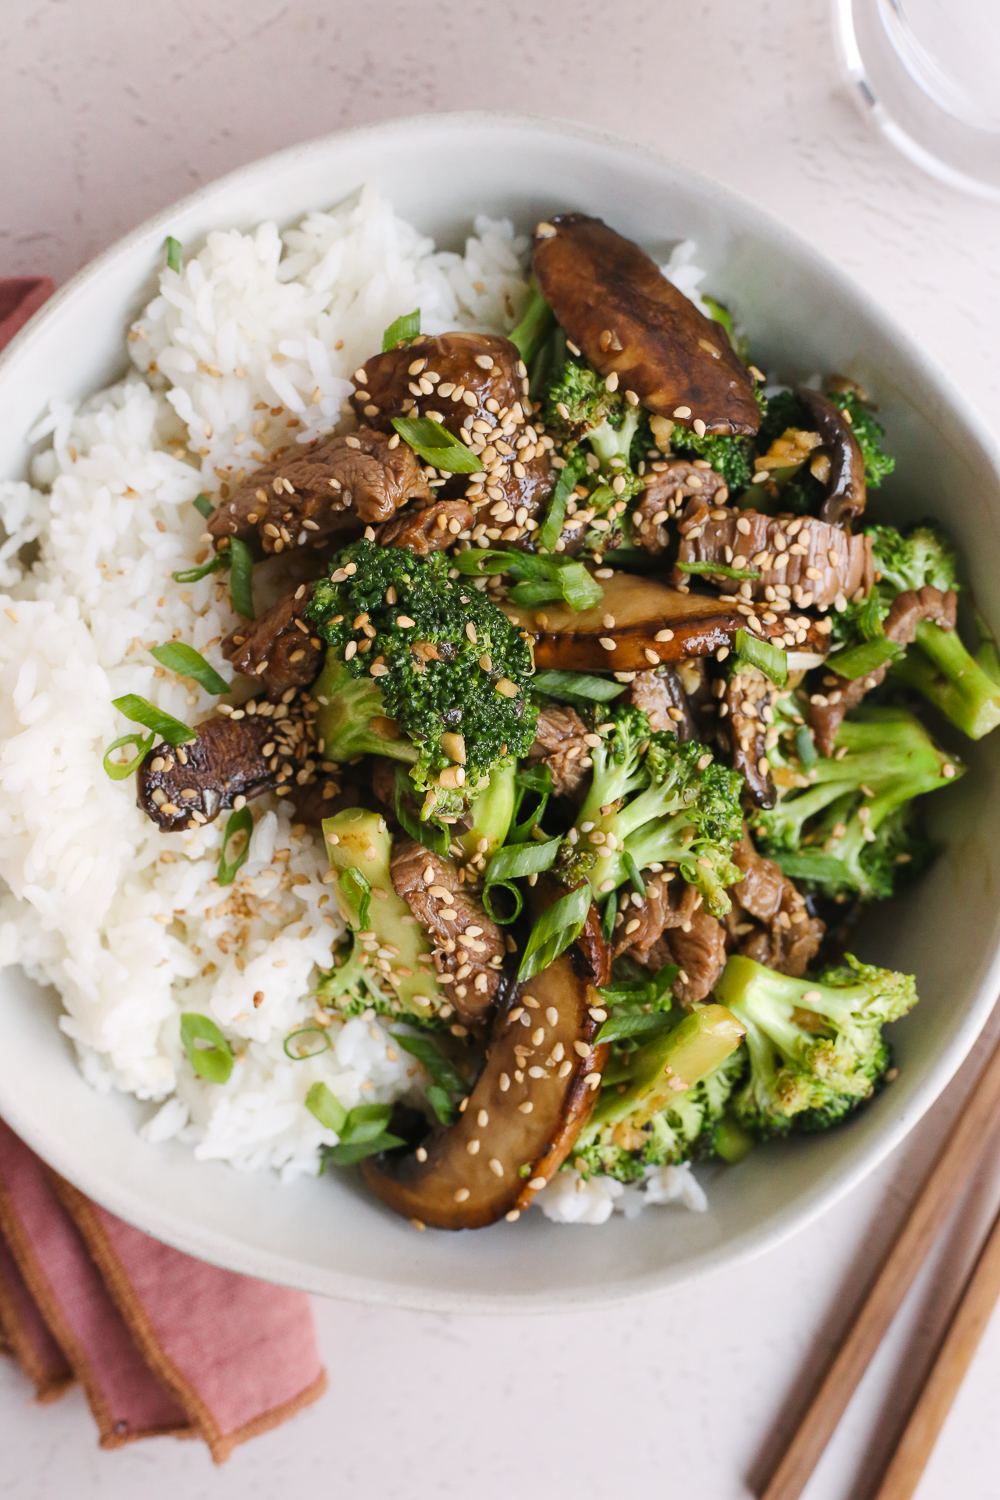 Overhead view of a sauce-covered beef and broccoli stir fry on top of white rice, garnished with green onions and sesame seeds